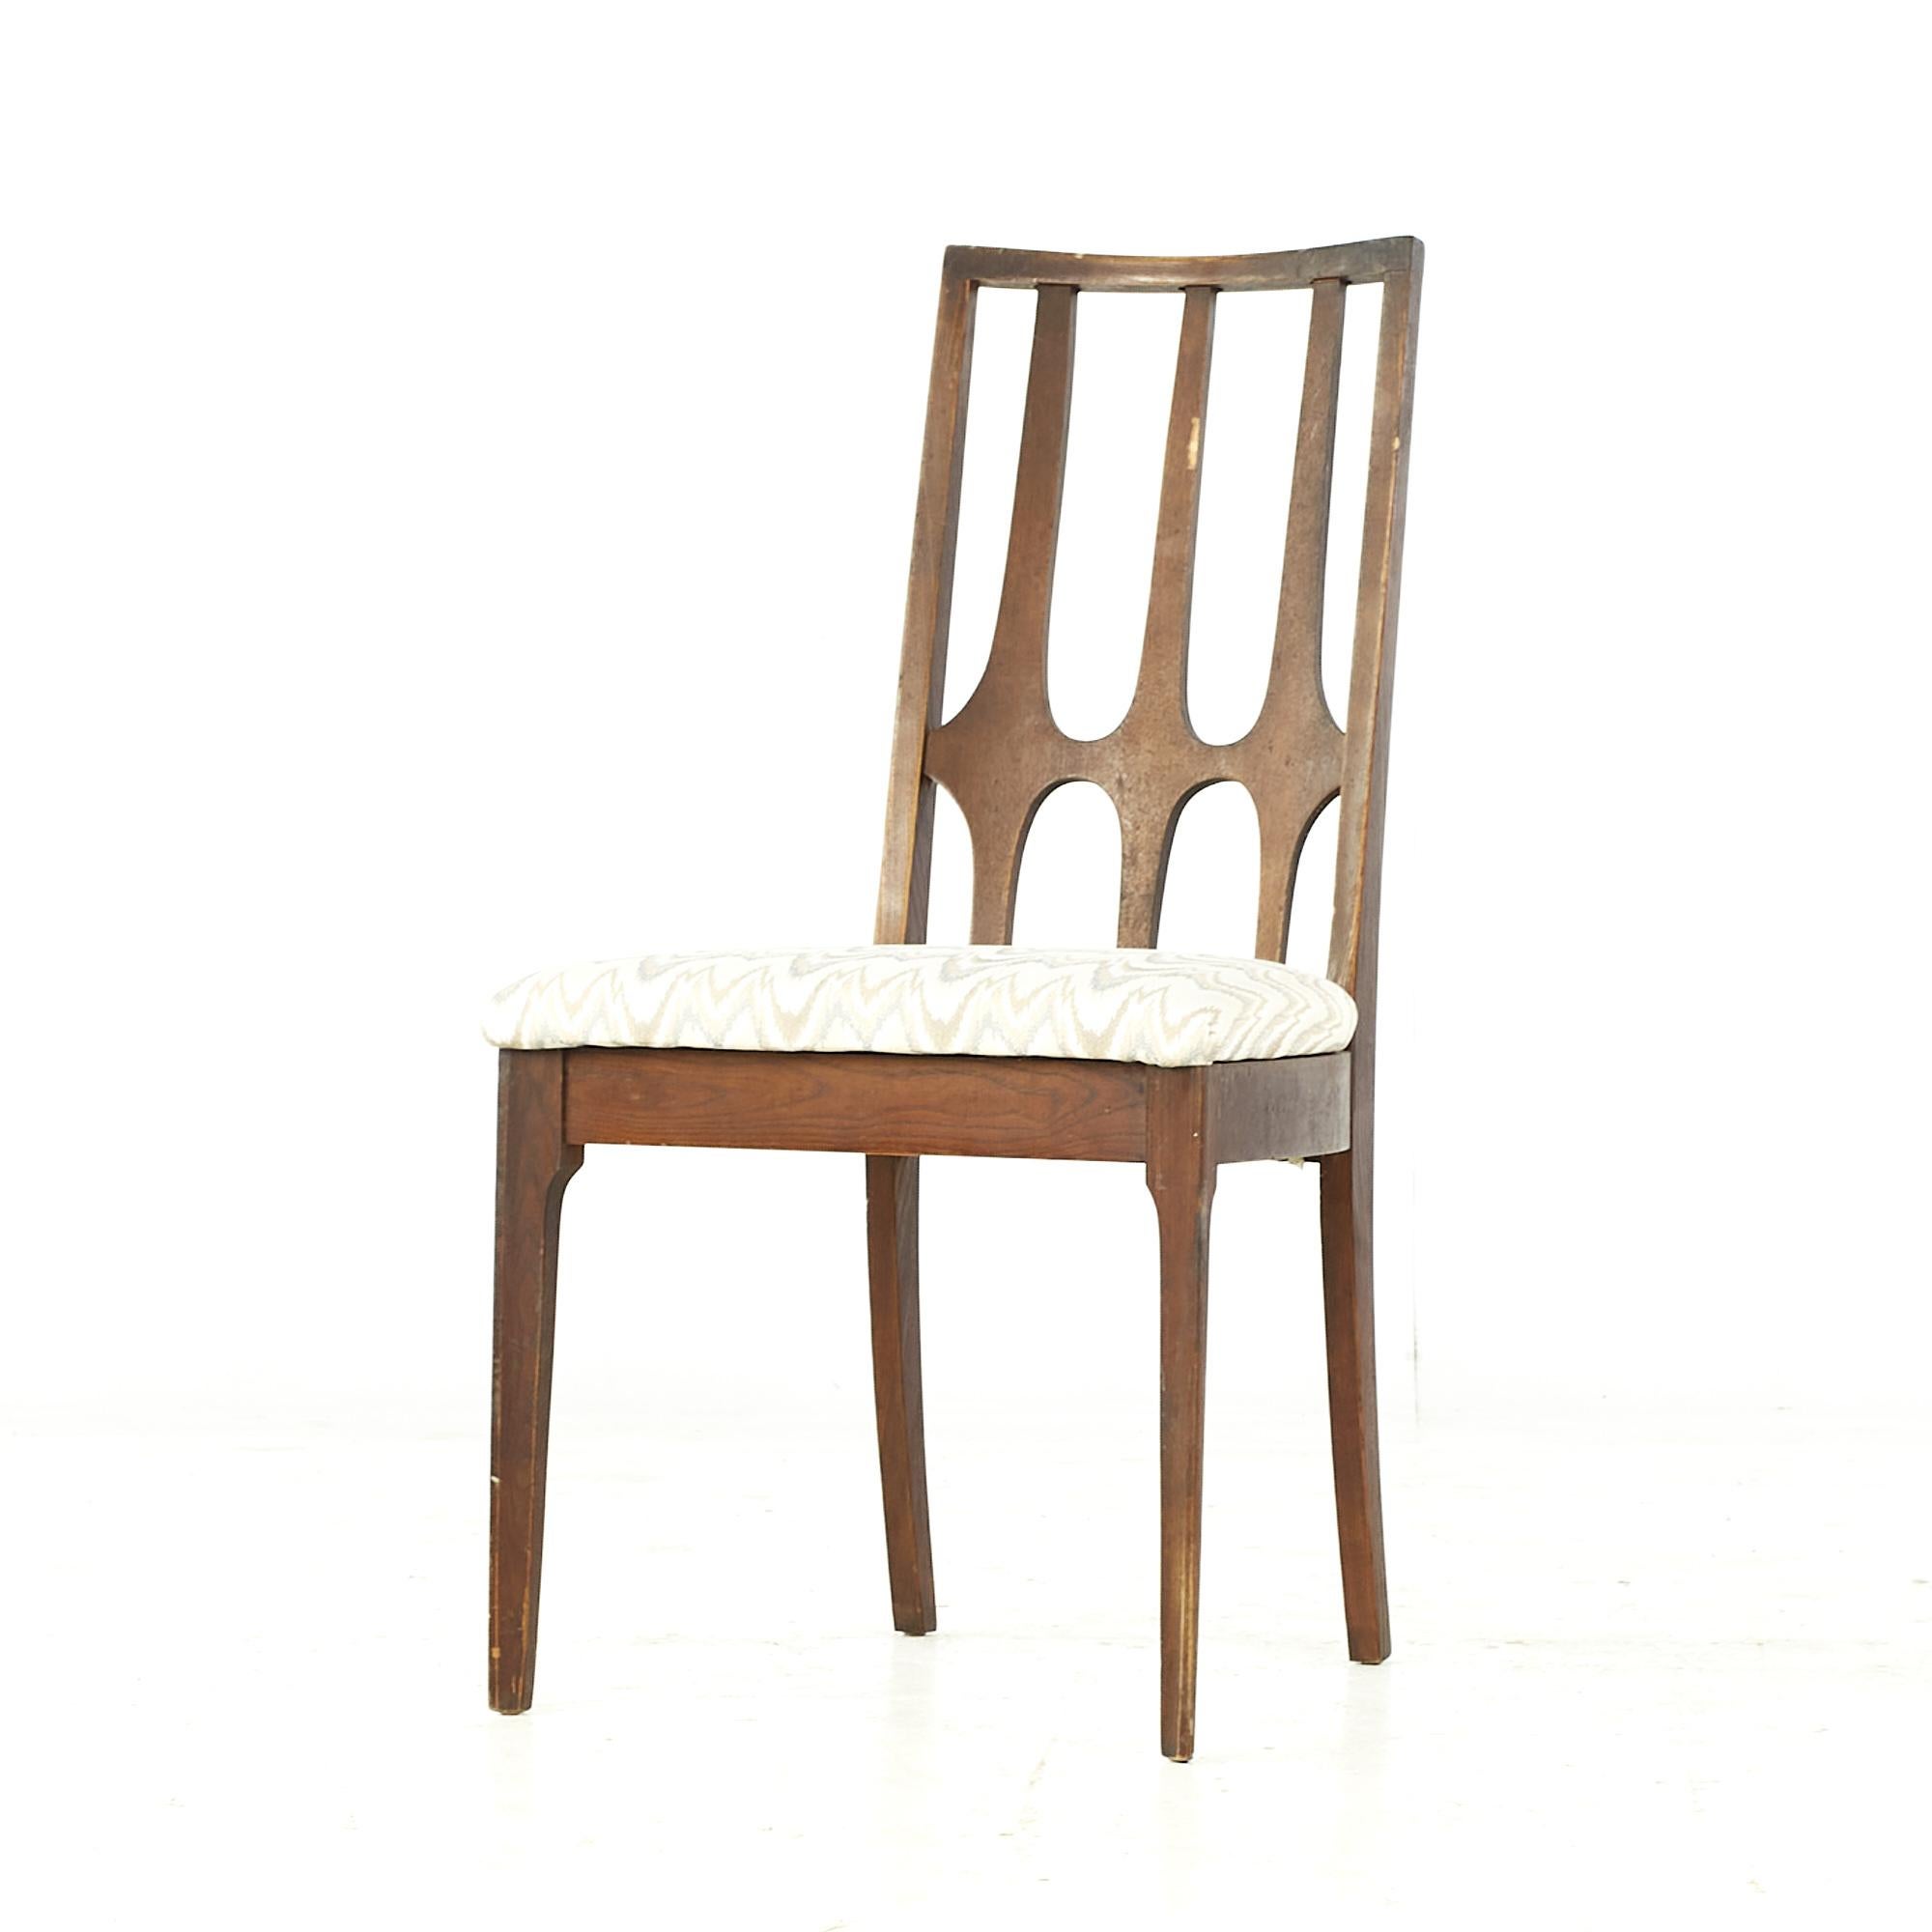 Late 20th Century Broyhill Brasilia Midcentury Walnut Dining Chairs, Set of 6 For Sale